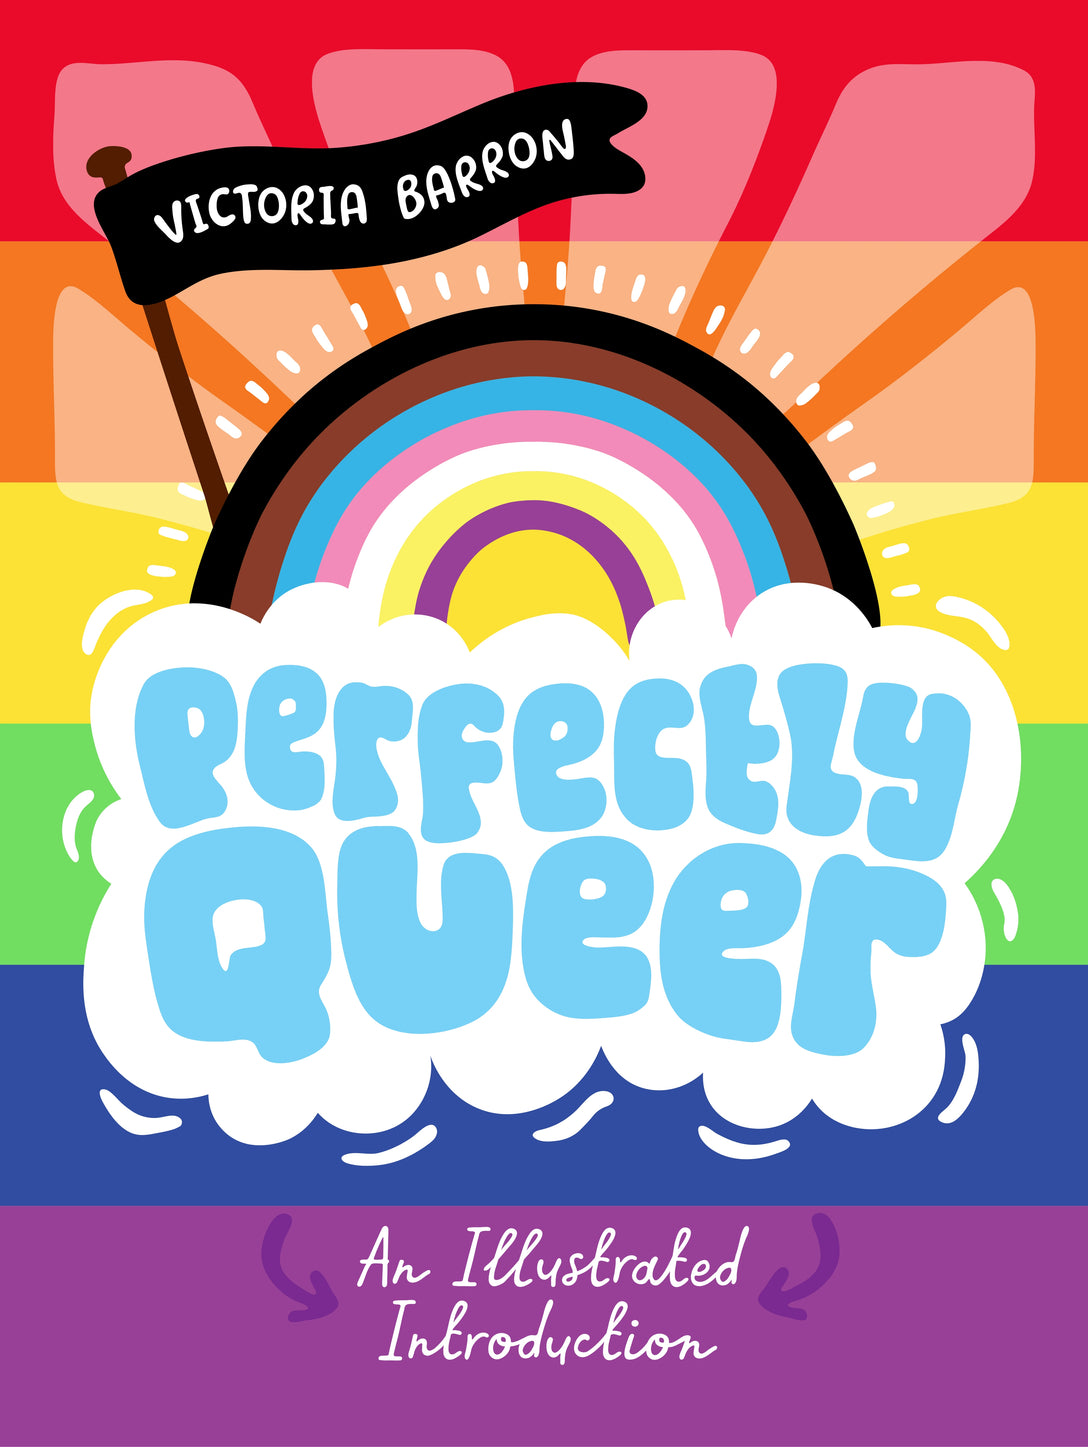 Perfectly Queer by Victoria Barron